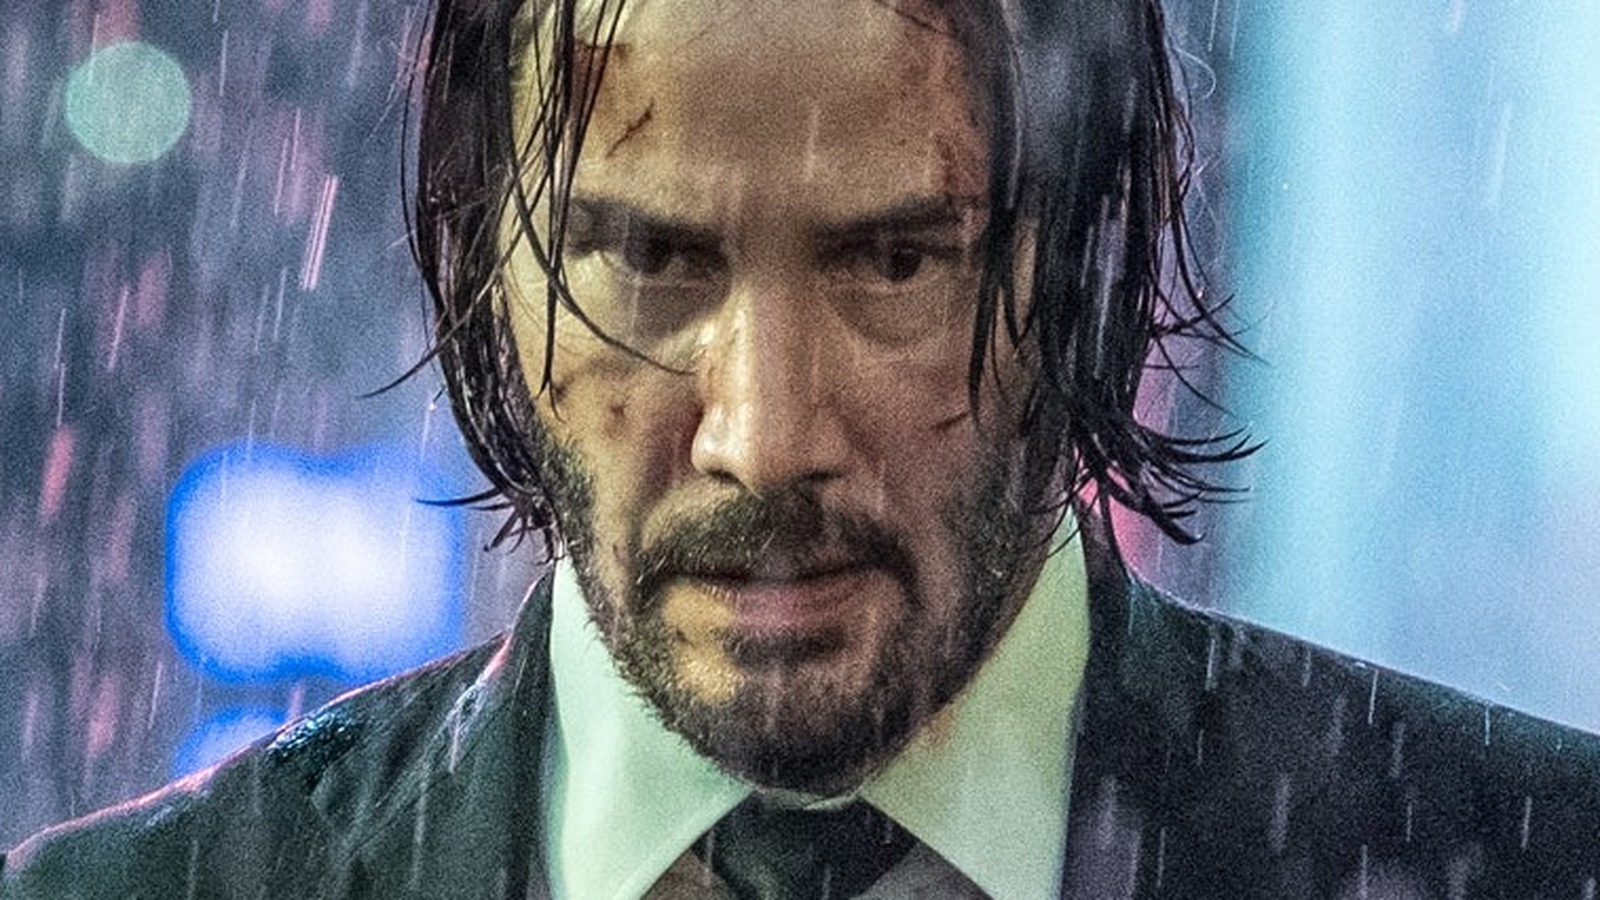 do you have to watch the john wick movies in order